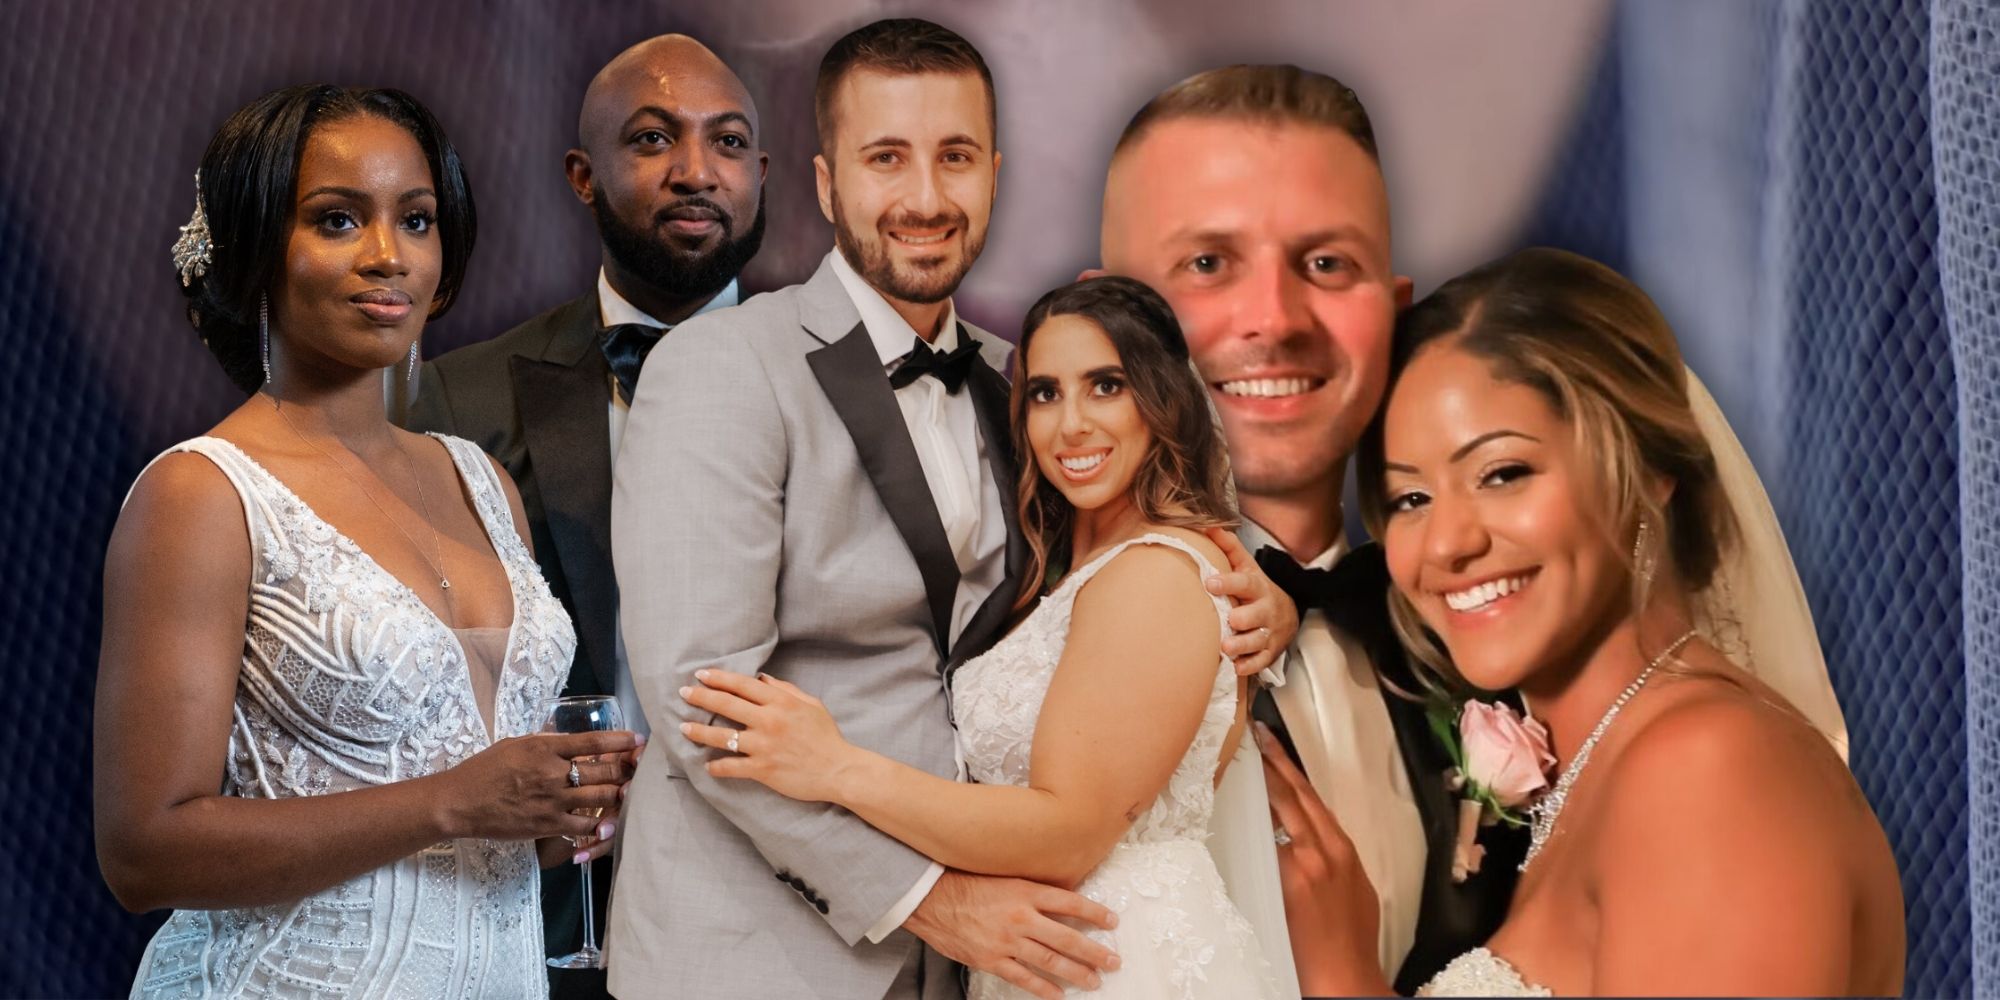 Married At First Sight Season 16 cast montage